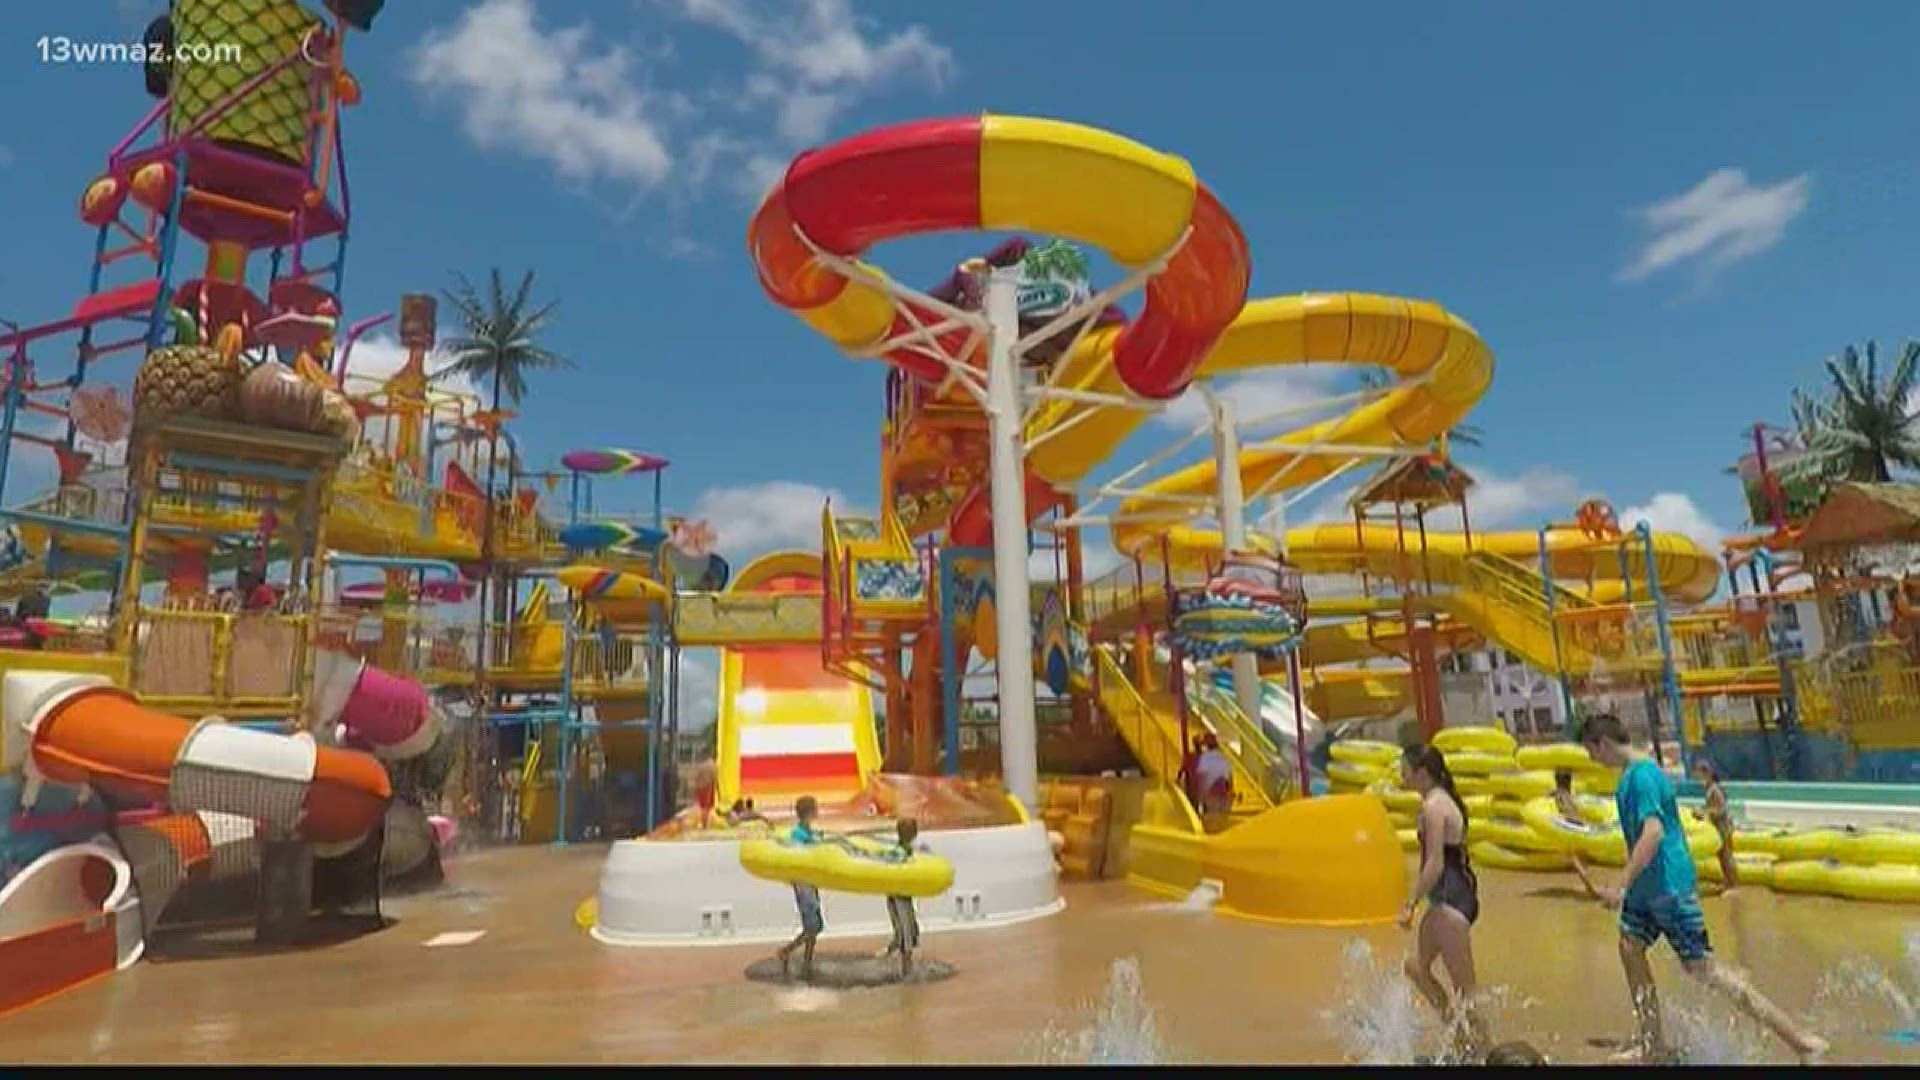 Thursday evening, Rigby's Water World in Warner Robins announced it will reopen on June 12 with additional rules in place.